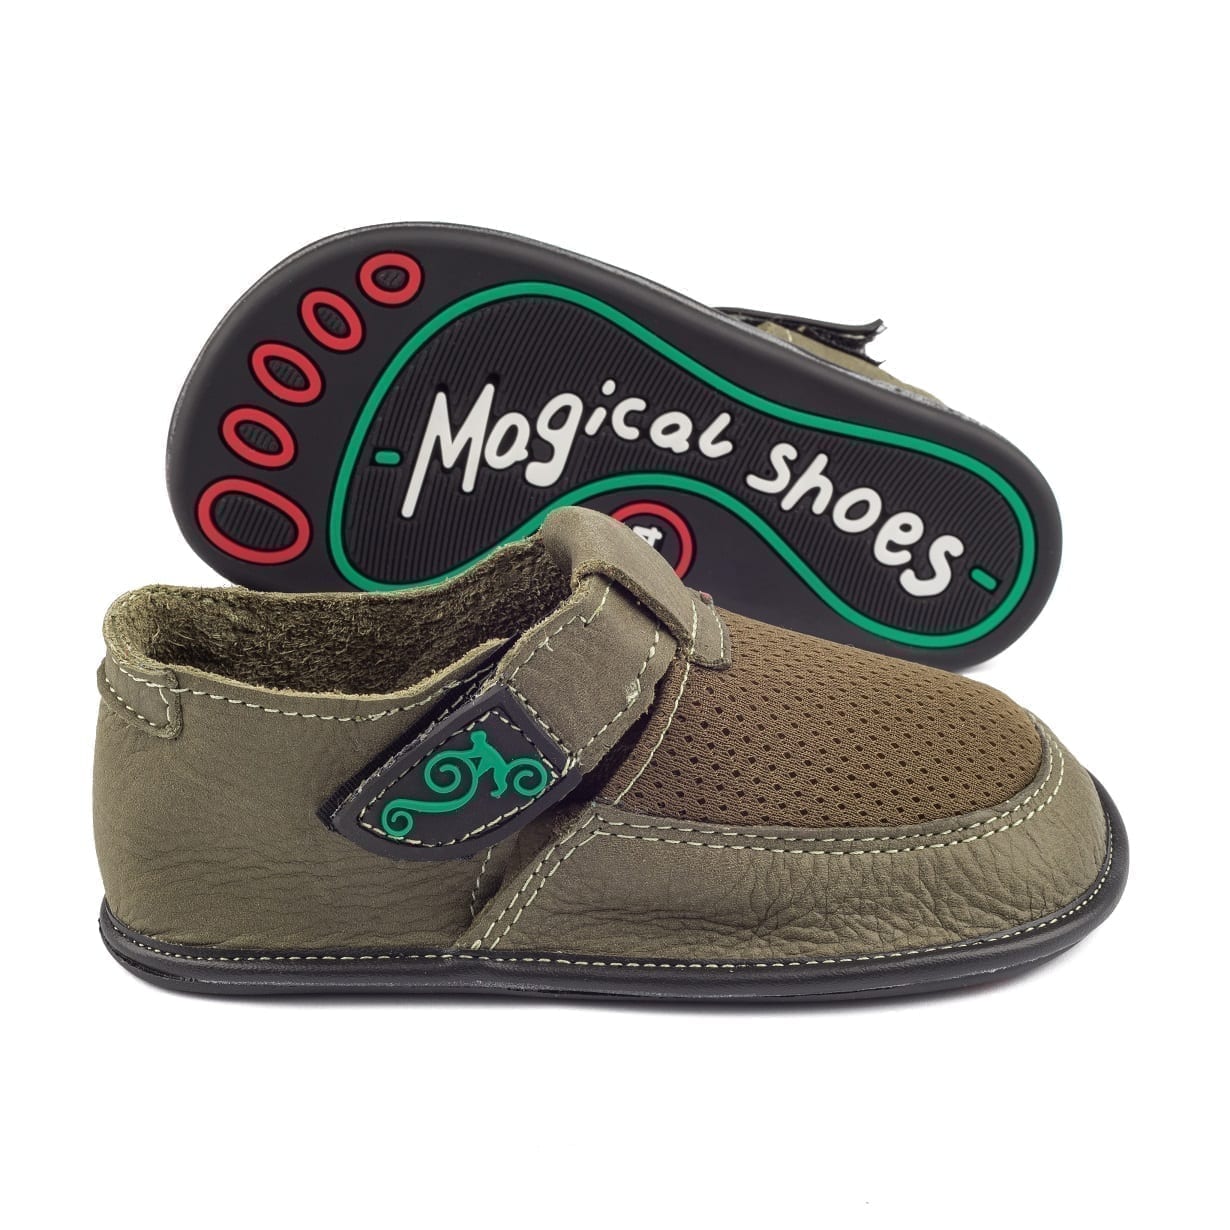 Barefoot Shoes For Kids BEBE BLUE RED Magical Shoes | lupon.gov.ph